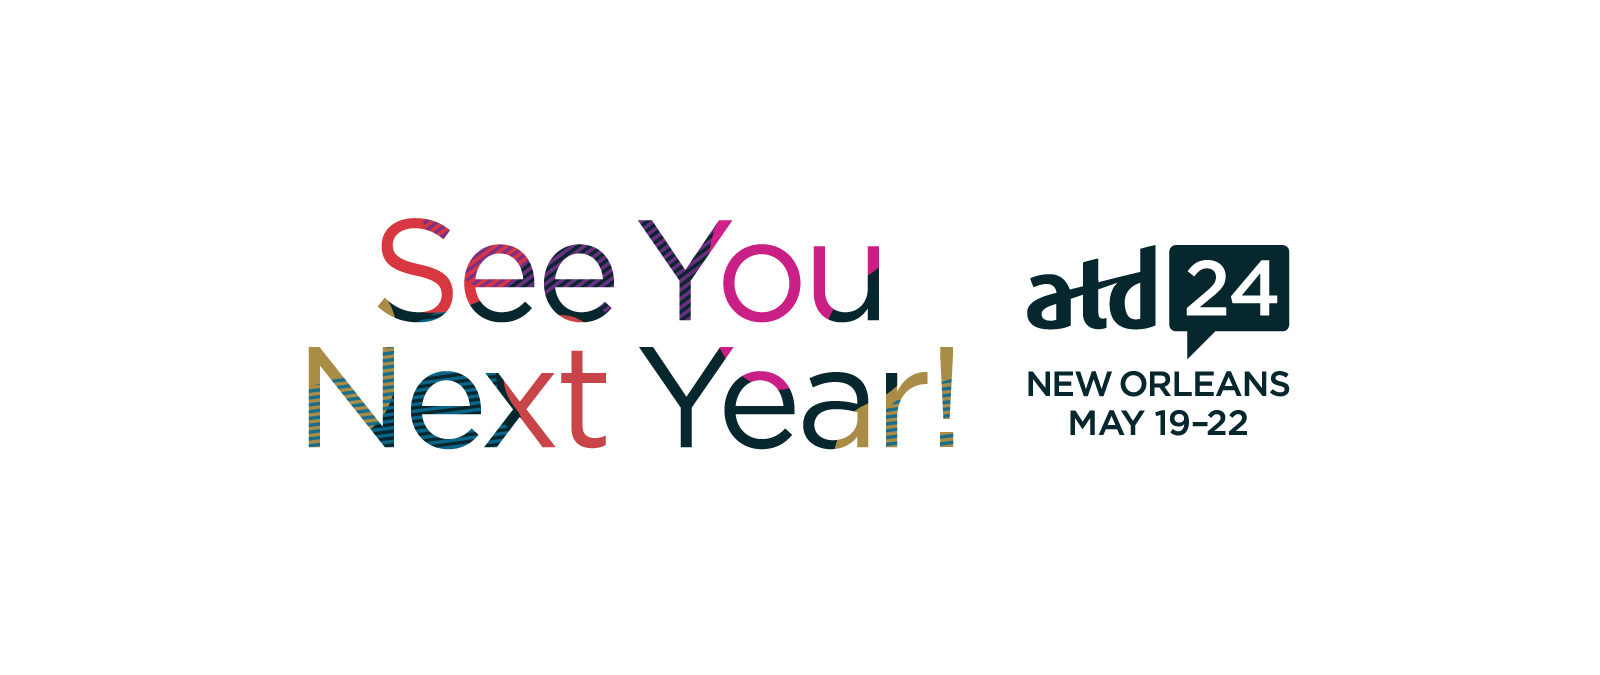 ATD24 New Orleans, May 19–22. See You Next Year!